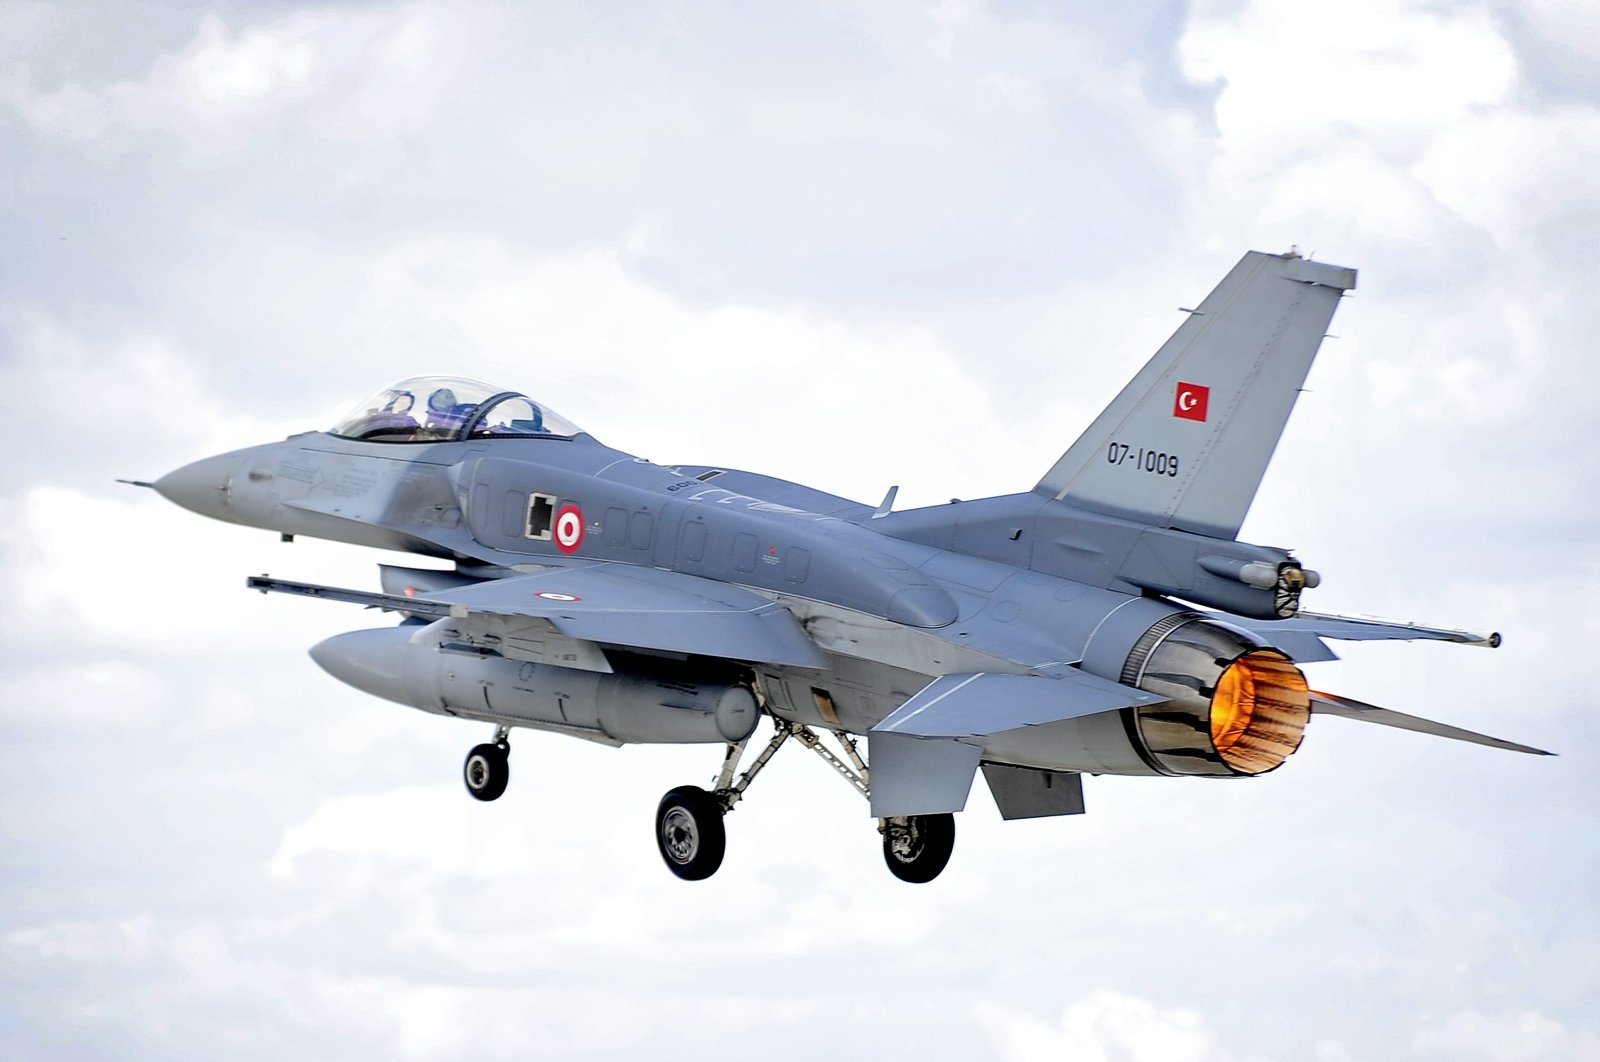 An F-16 Fighting Falcon of the Turkish Air Force takes off on a sortie from an air base during Exercise Anatolian Eagle, in Konya, Turkey. (Courtesy of Turkish Ministry of Defense)